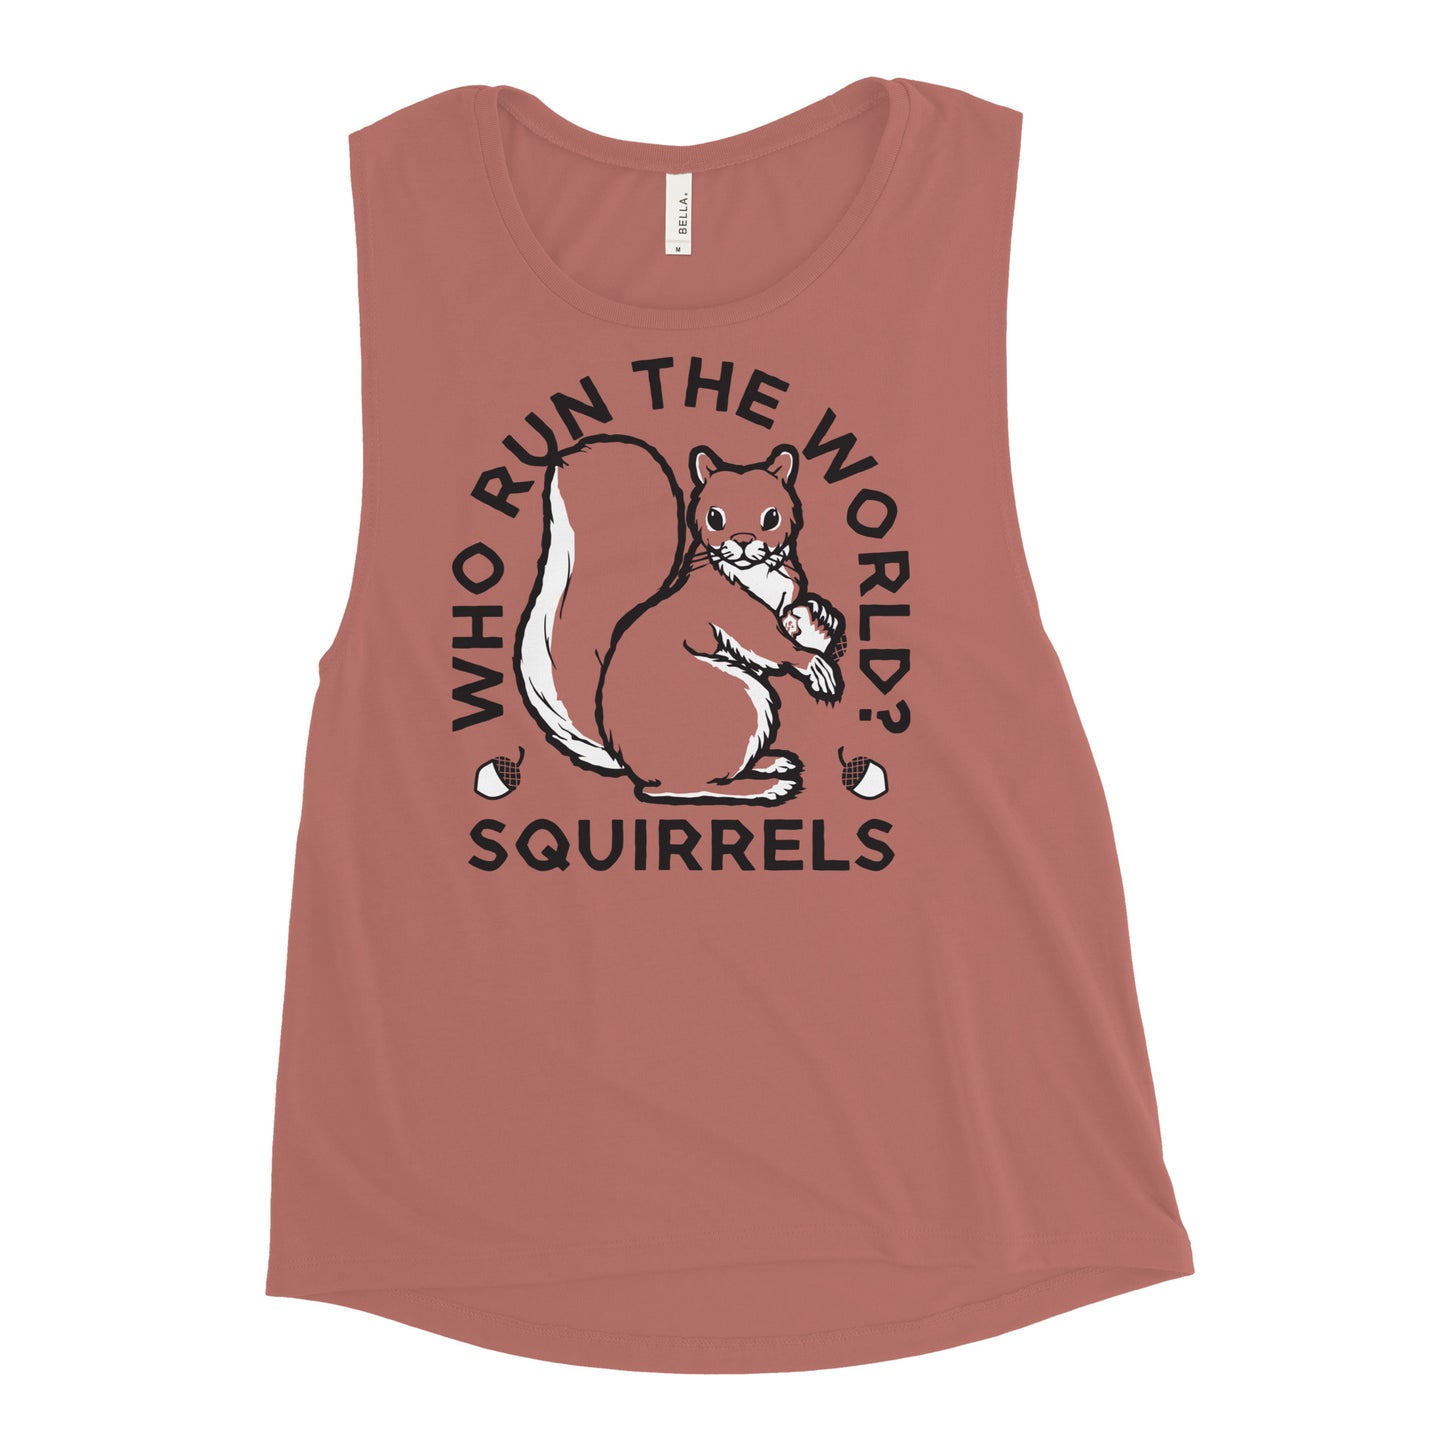 Who Run The World? Squirrels Women's Muscle Tank